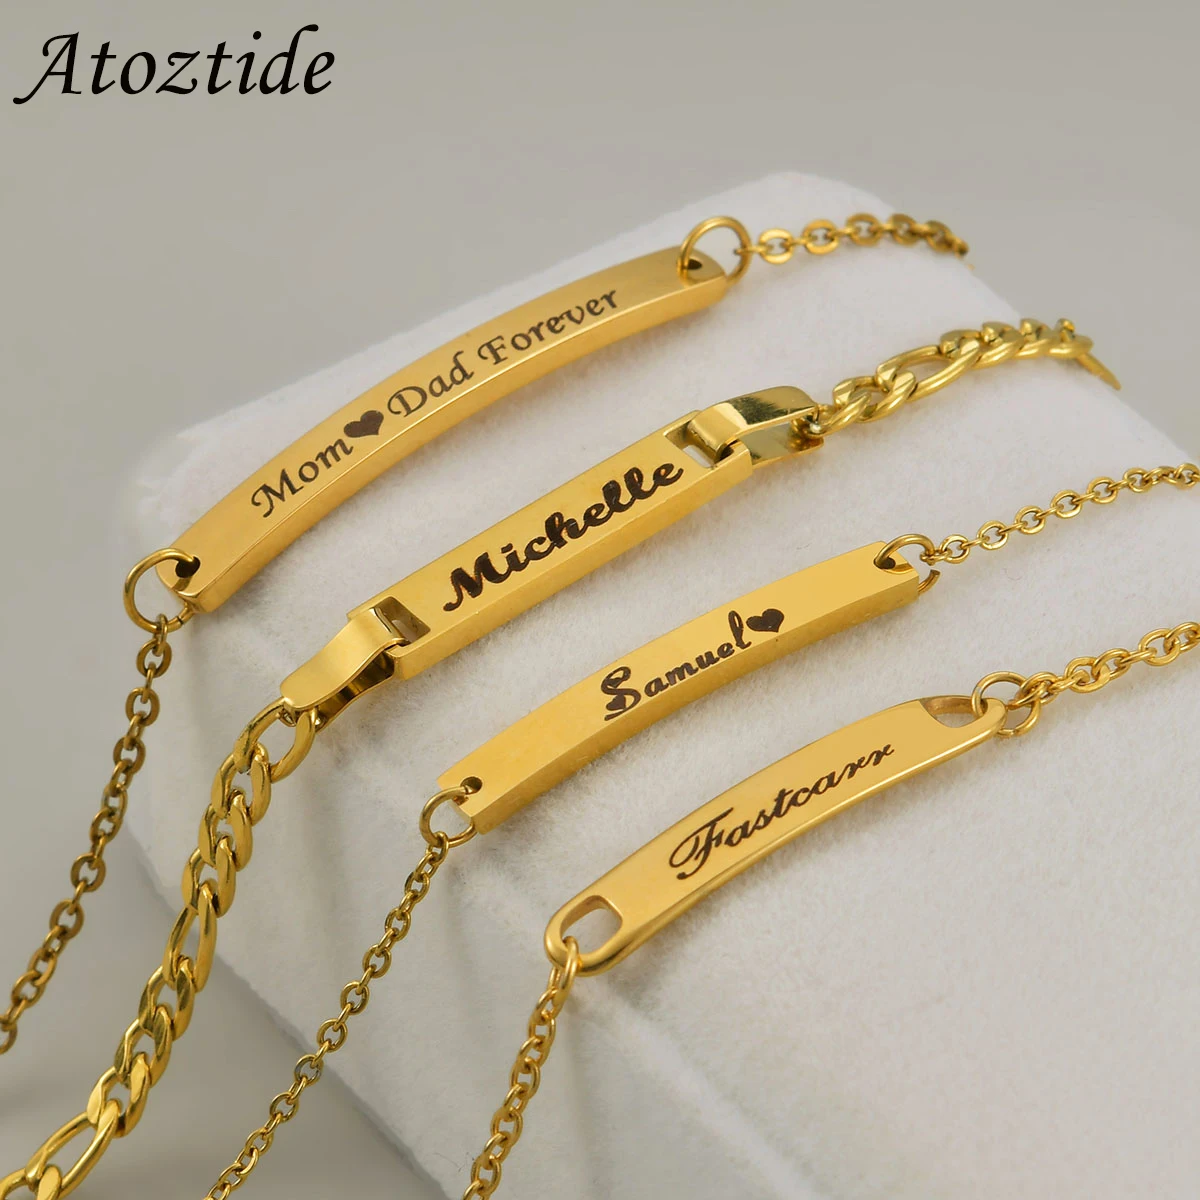 Atoztide Custom Baby Name Bar Nameplate Bracelet For Stainless Steel Women Kids Adjustable Link Chain Personalized Jewelry Gift alcatel радионяня baby link 160